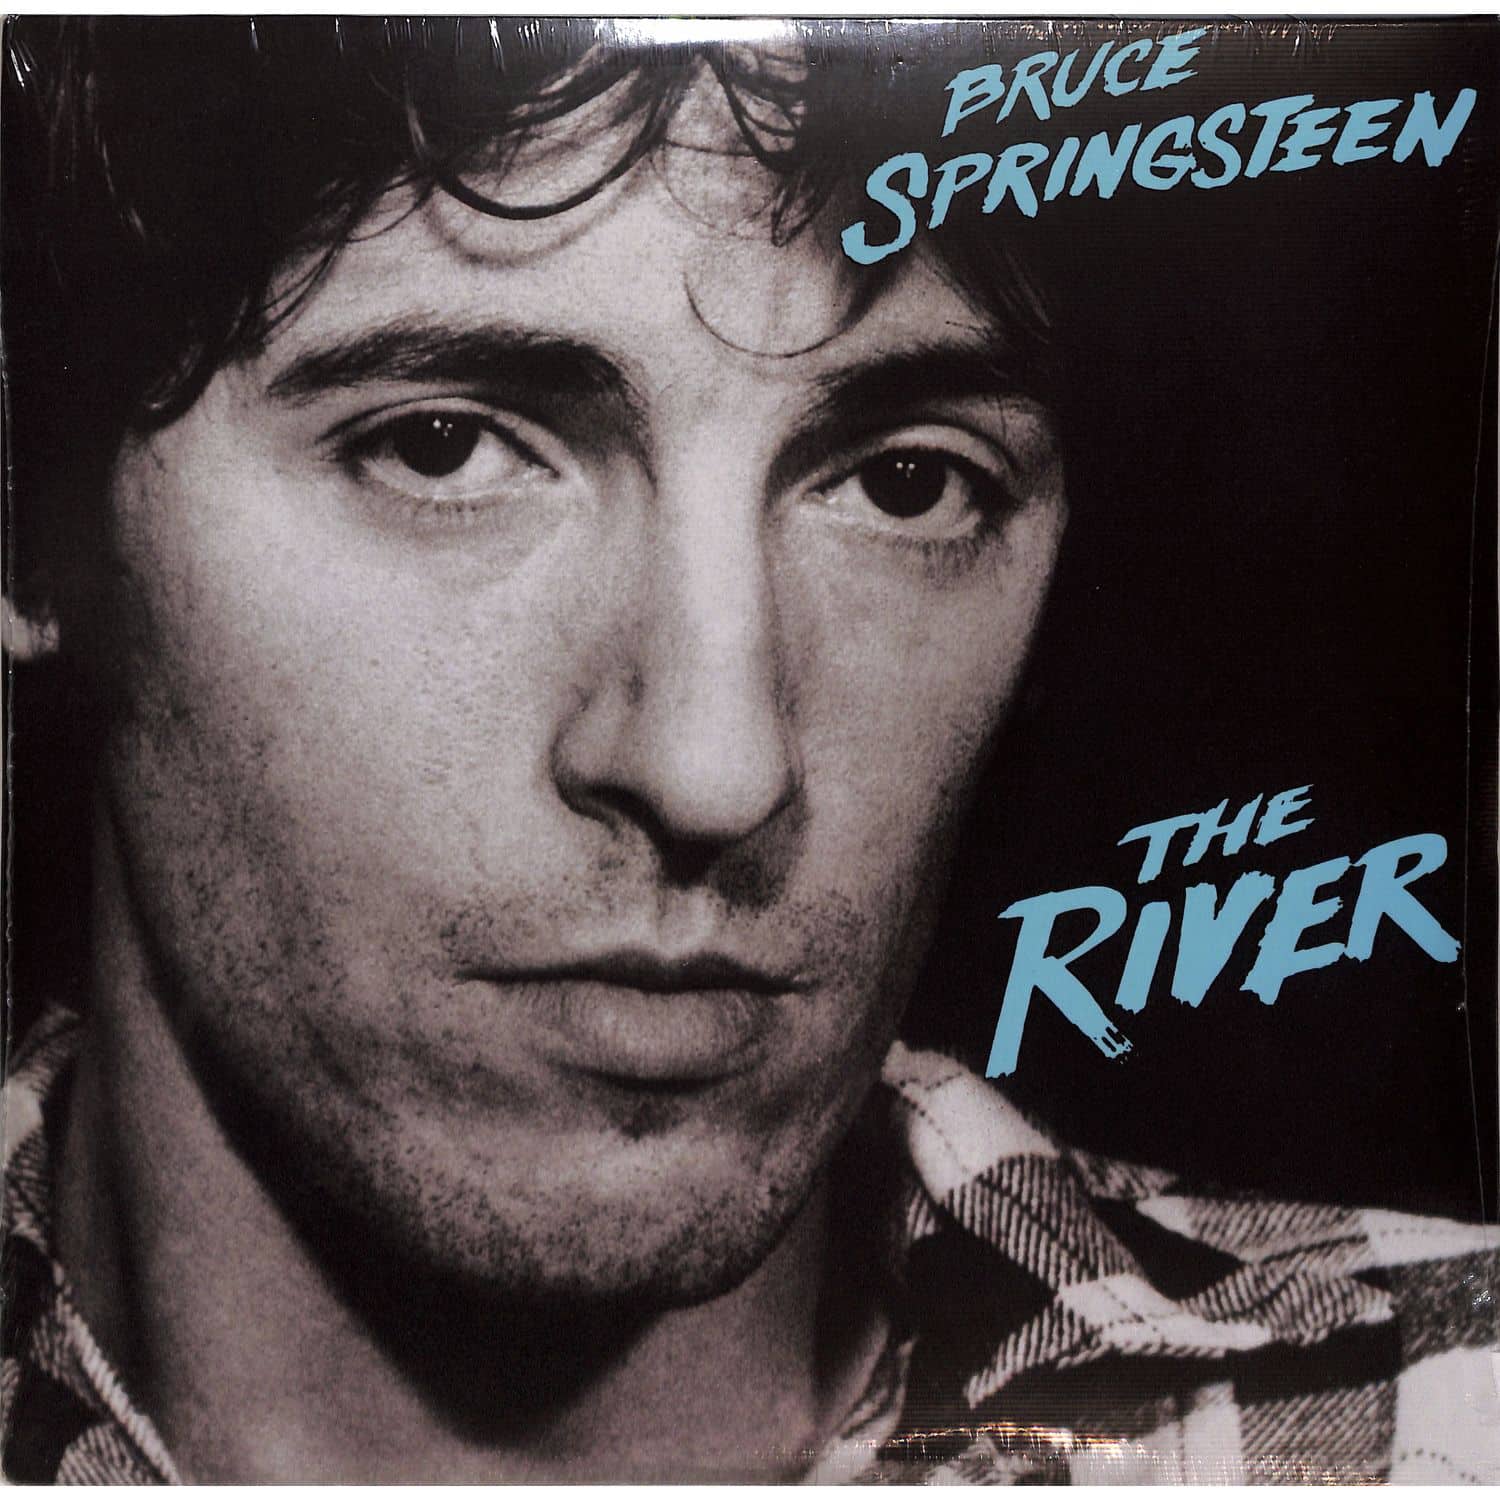 Bruce Springsteen - THE RIVER 